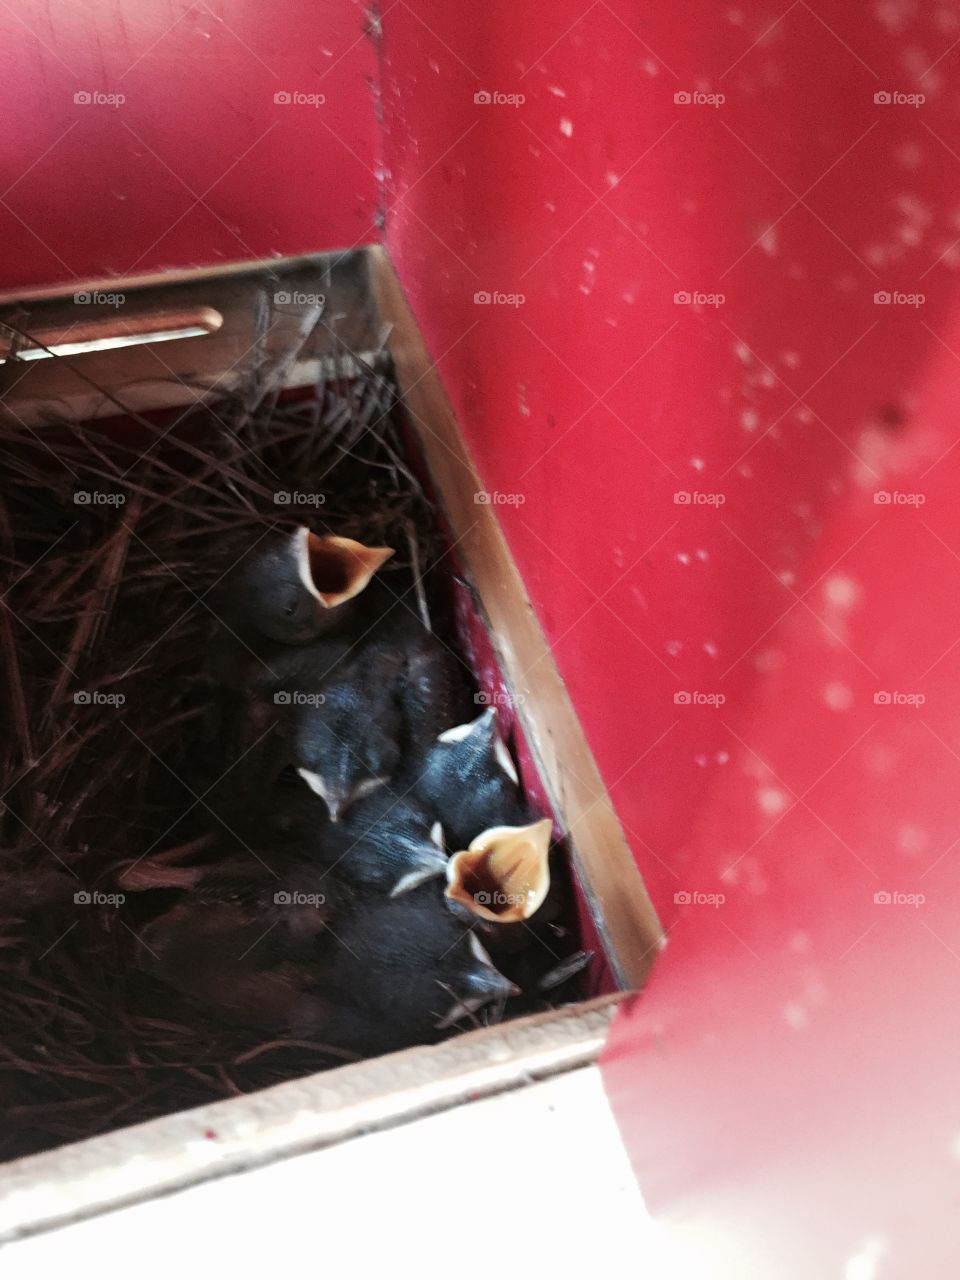 5 little hungry bluebirds waiting for momma to bring them some food. 